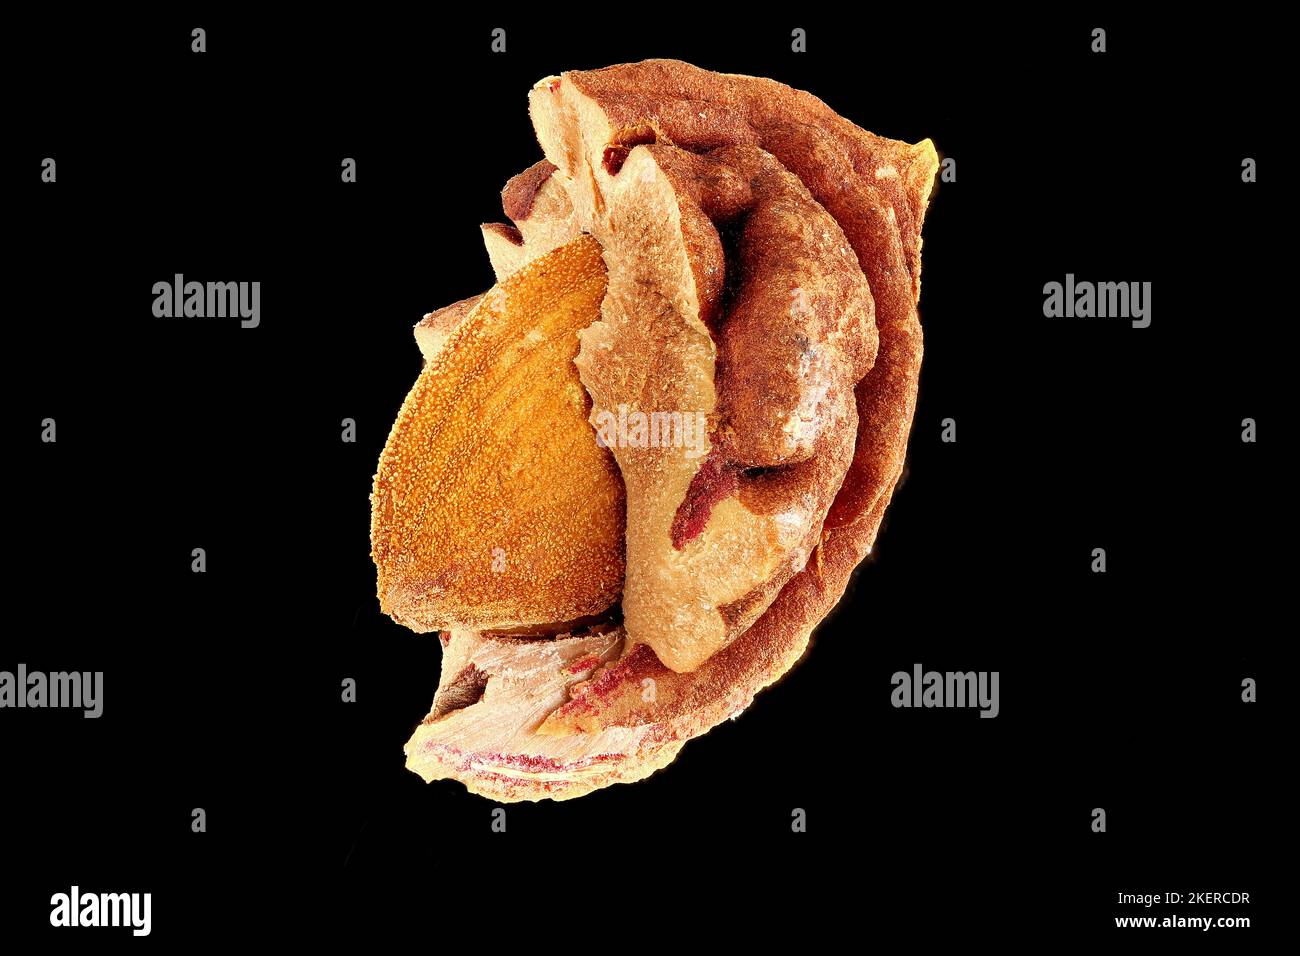 Prunus persica, Peach, Pfirsich, close up, broken stone with seed inside Stock Photo